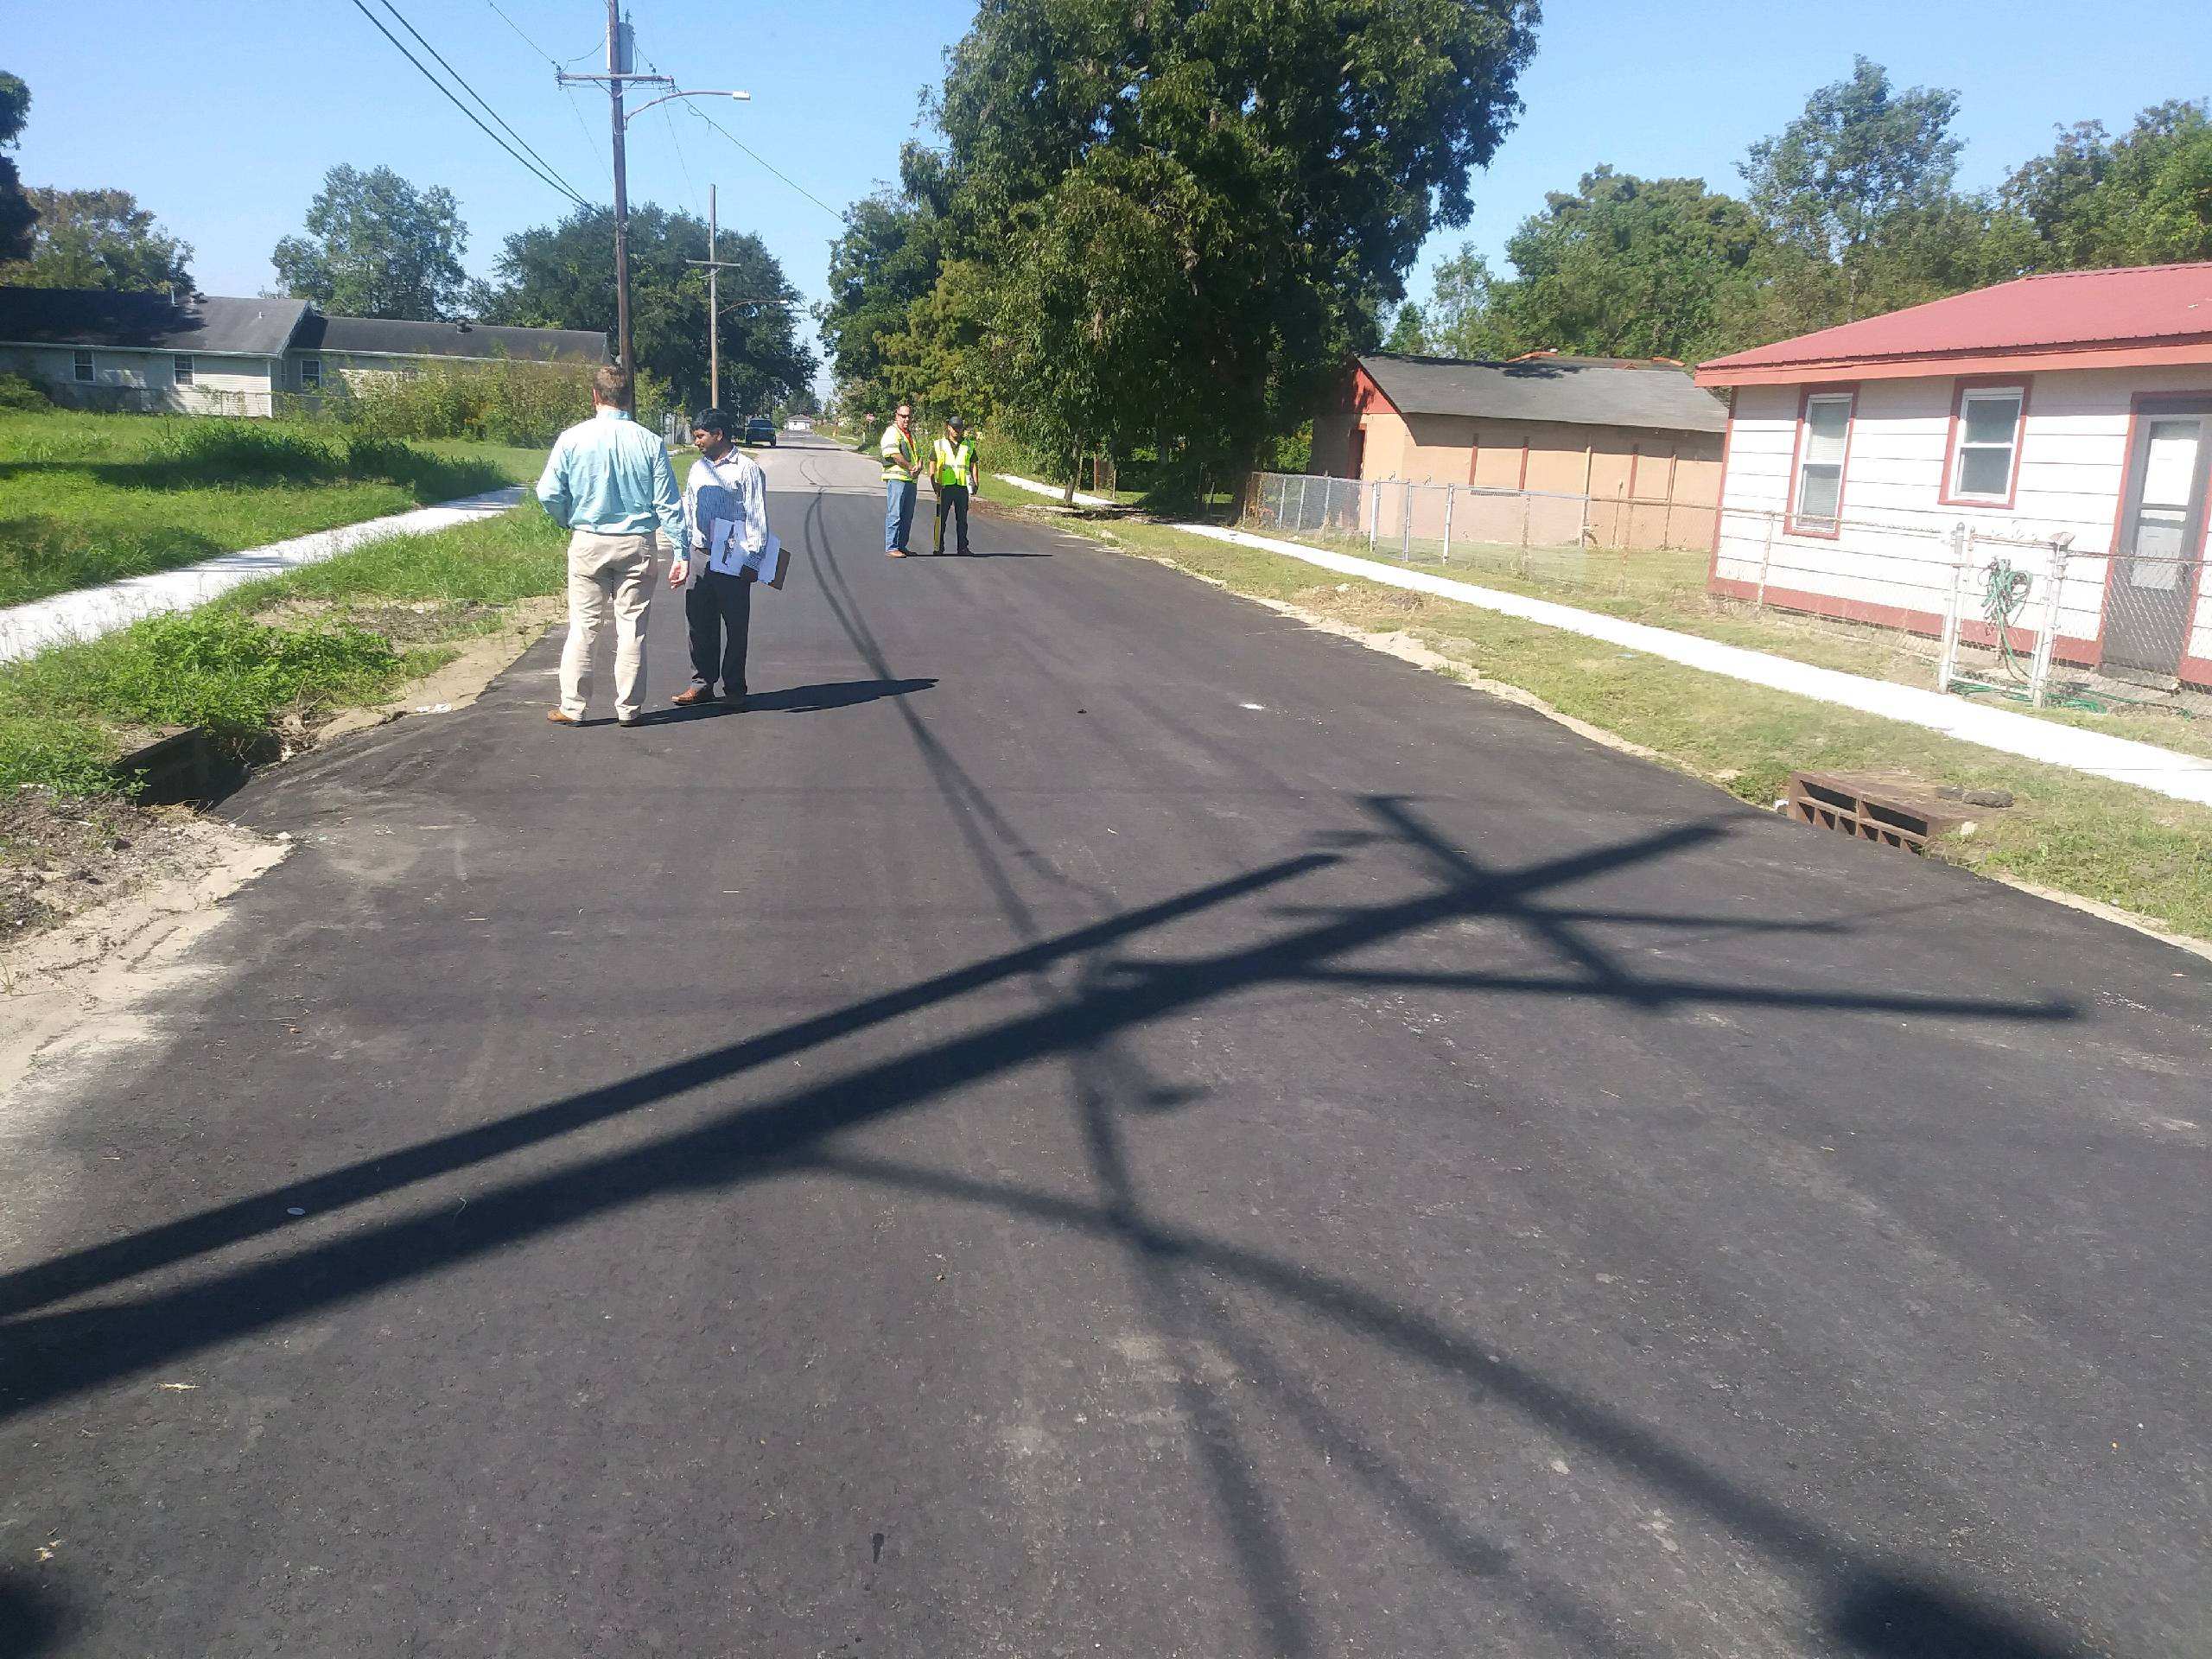 LOWER NINTH WARD NORTHWEST GROUP A READY FOR INSPECTION